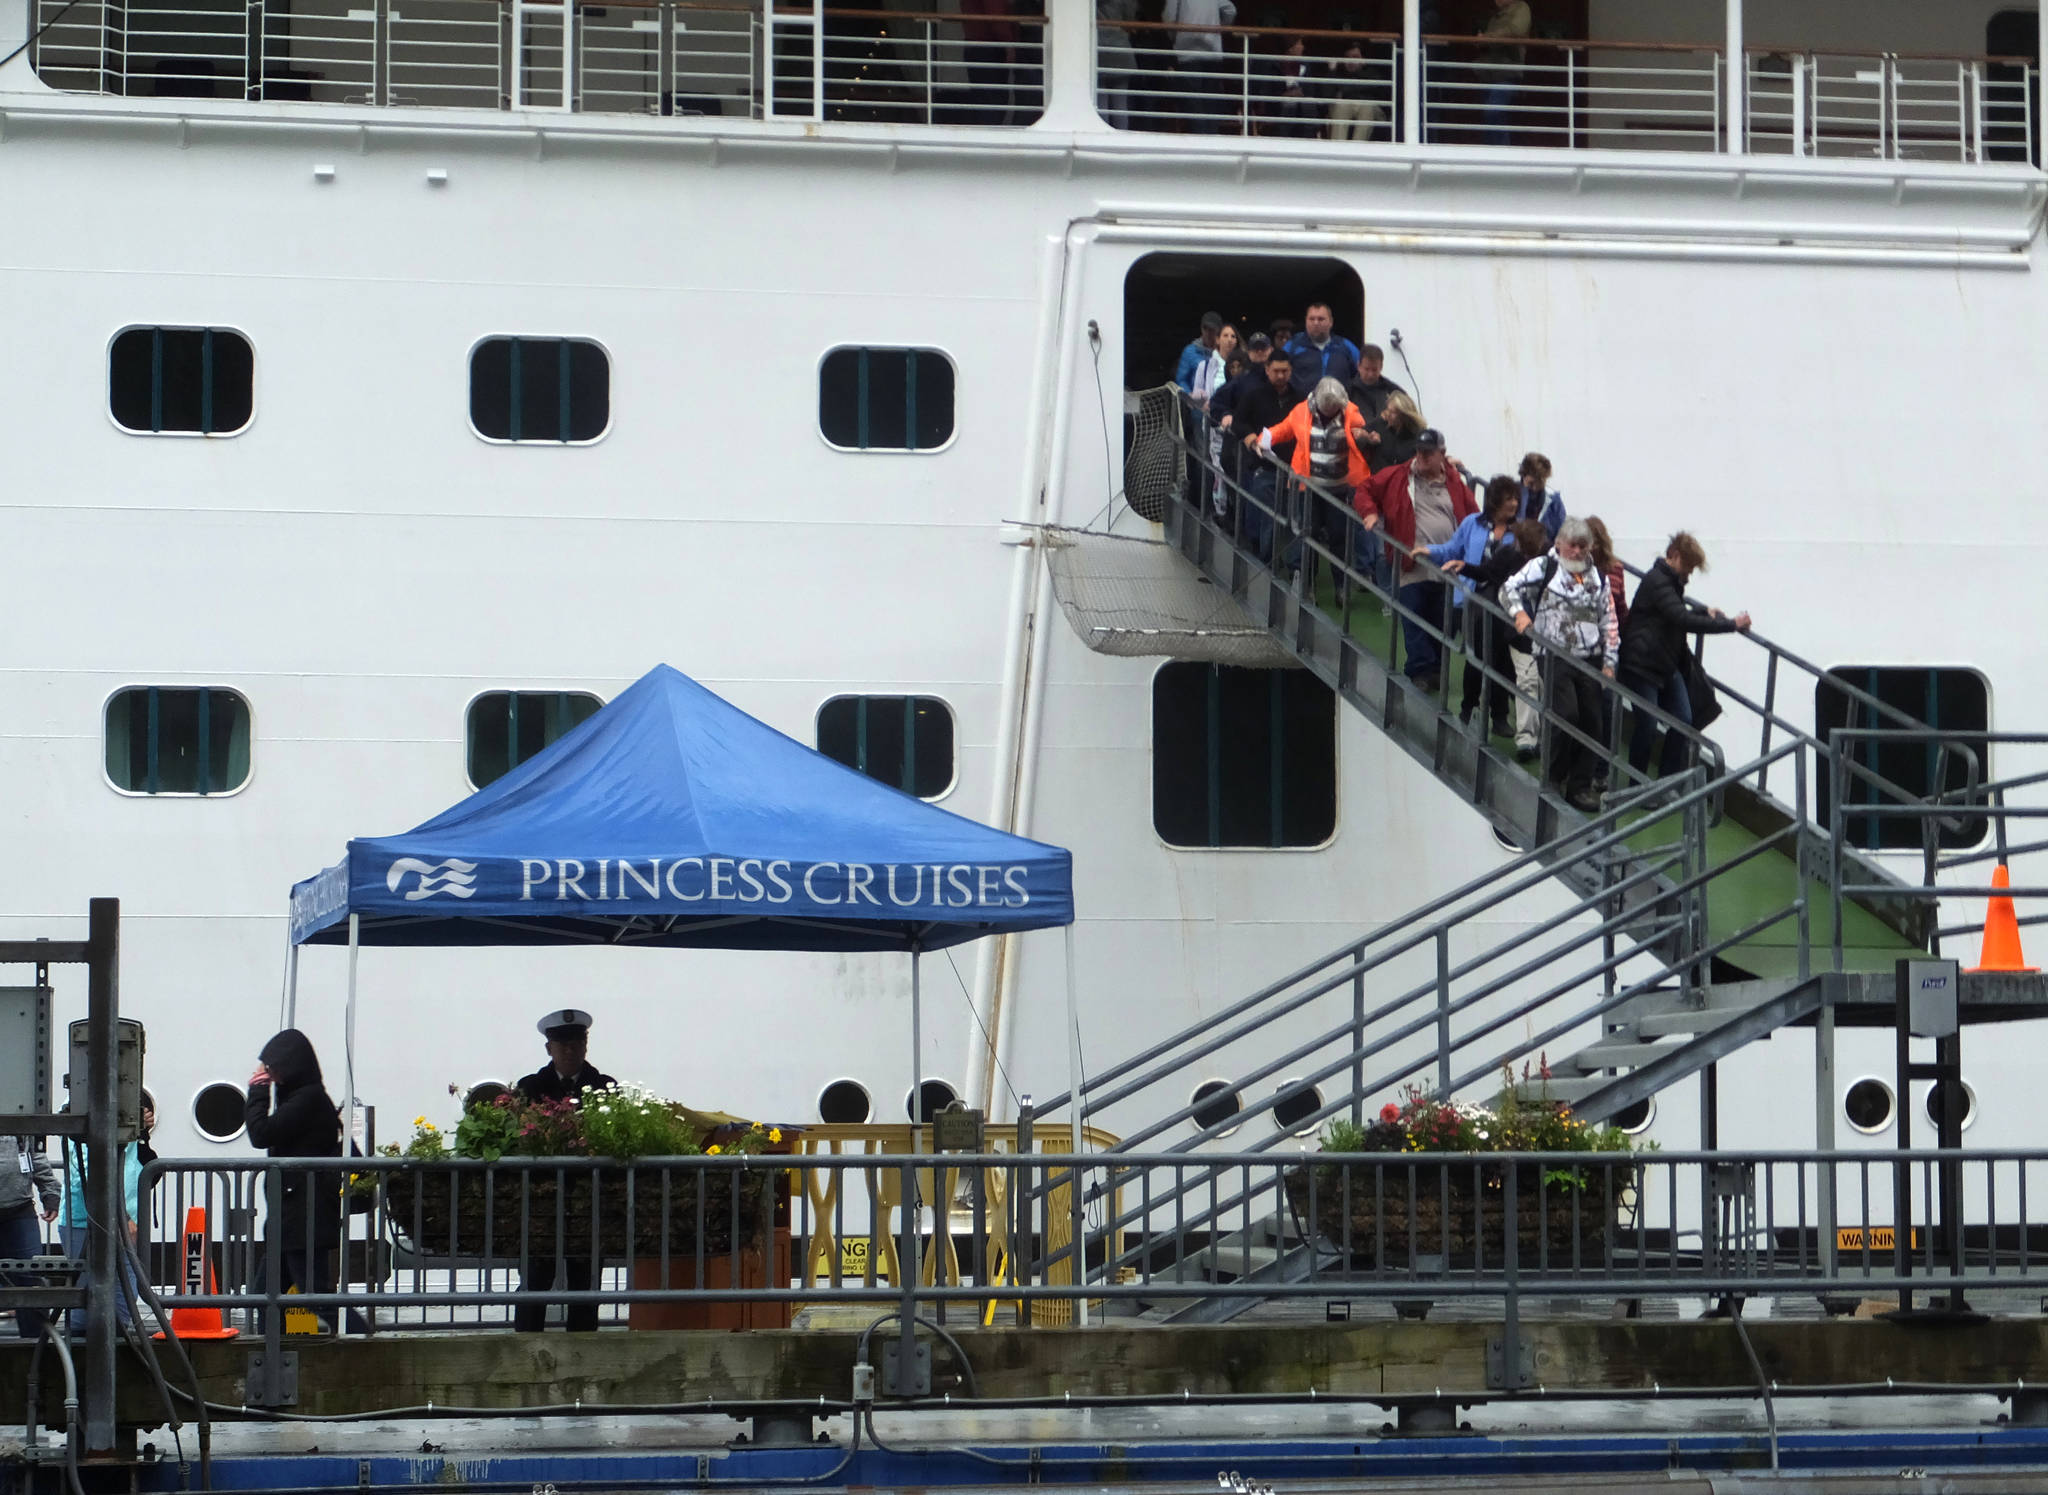 Passengers of the Emerald Princess cruise ship disembark on Wednesday, July 26, 2017, in Juneau, Alaska, hours after arriving at port. A domestic dispute aboard the cruise ship led to the death of a 39-year-old Utah woman, and the FBI is investigating what happened in U.S. waters off Alaska, the agency said Wednesday. (Becky Bohrer | The Associated Press)